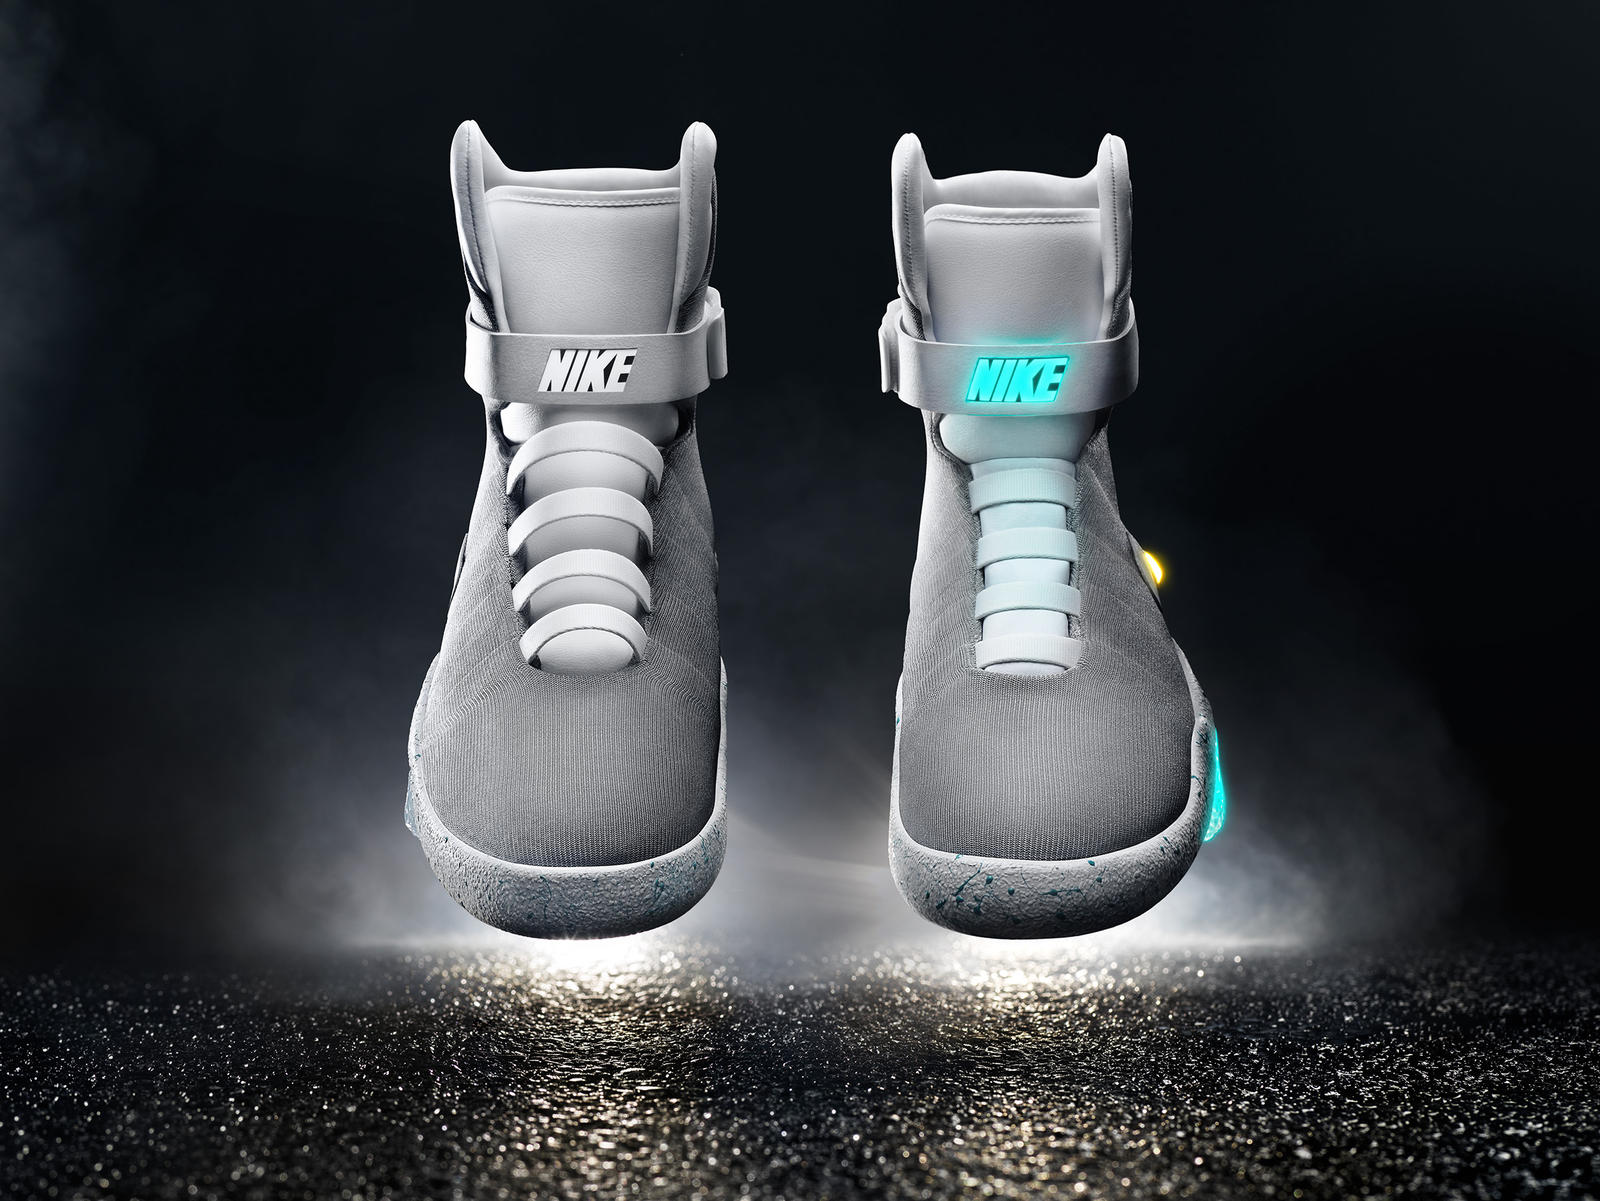 Auction For The 2015 Nike Mag From "Back To The Future"